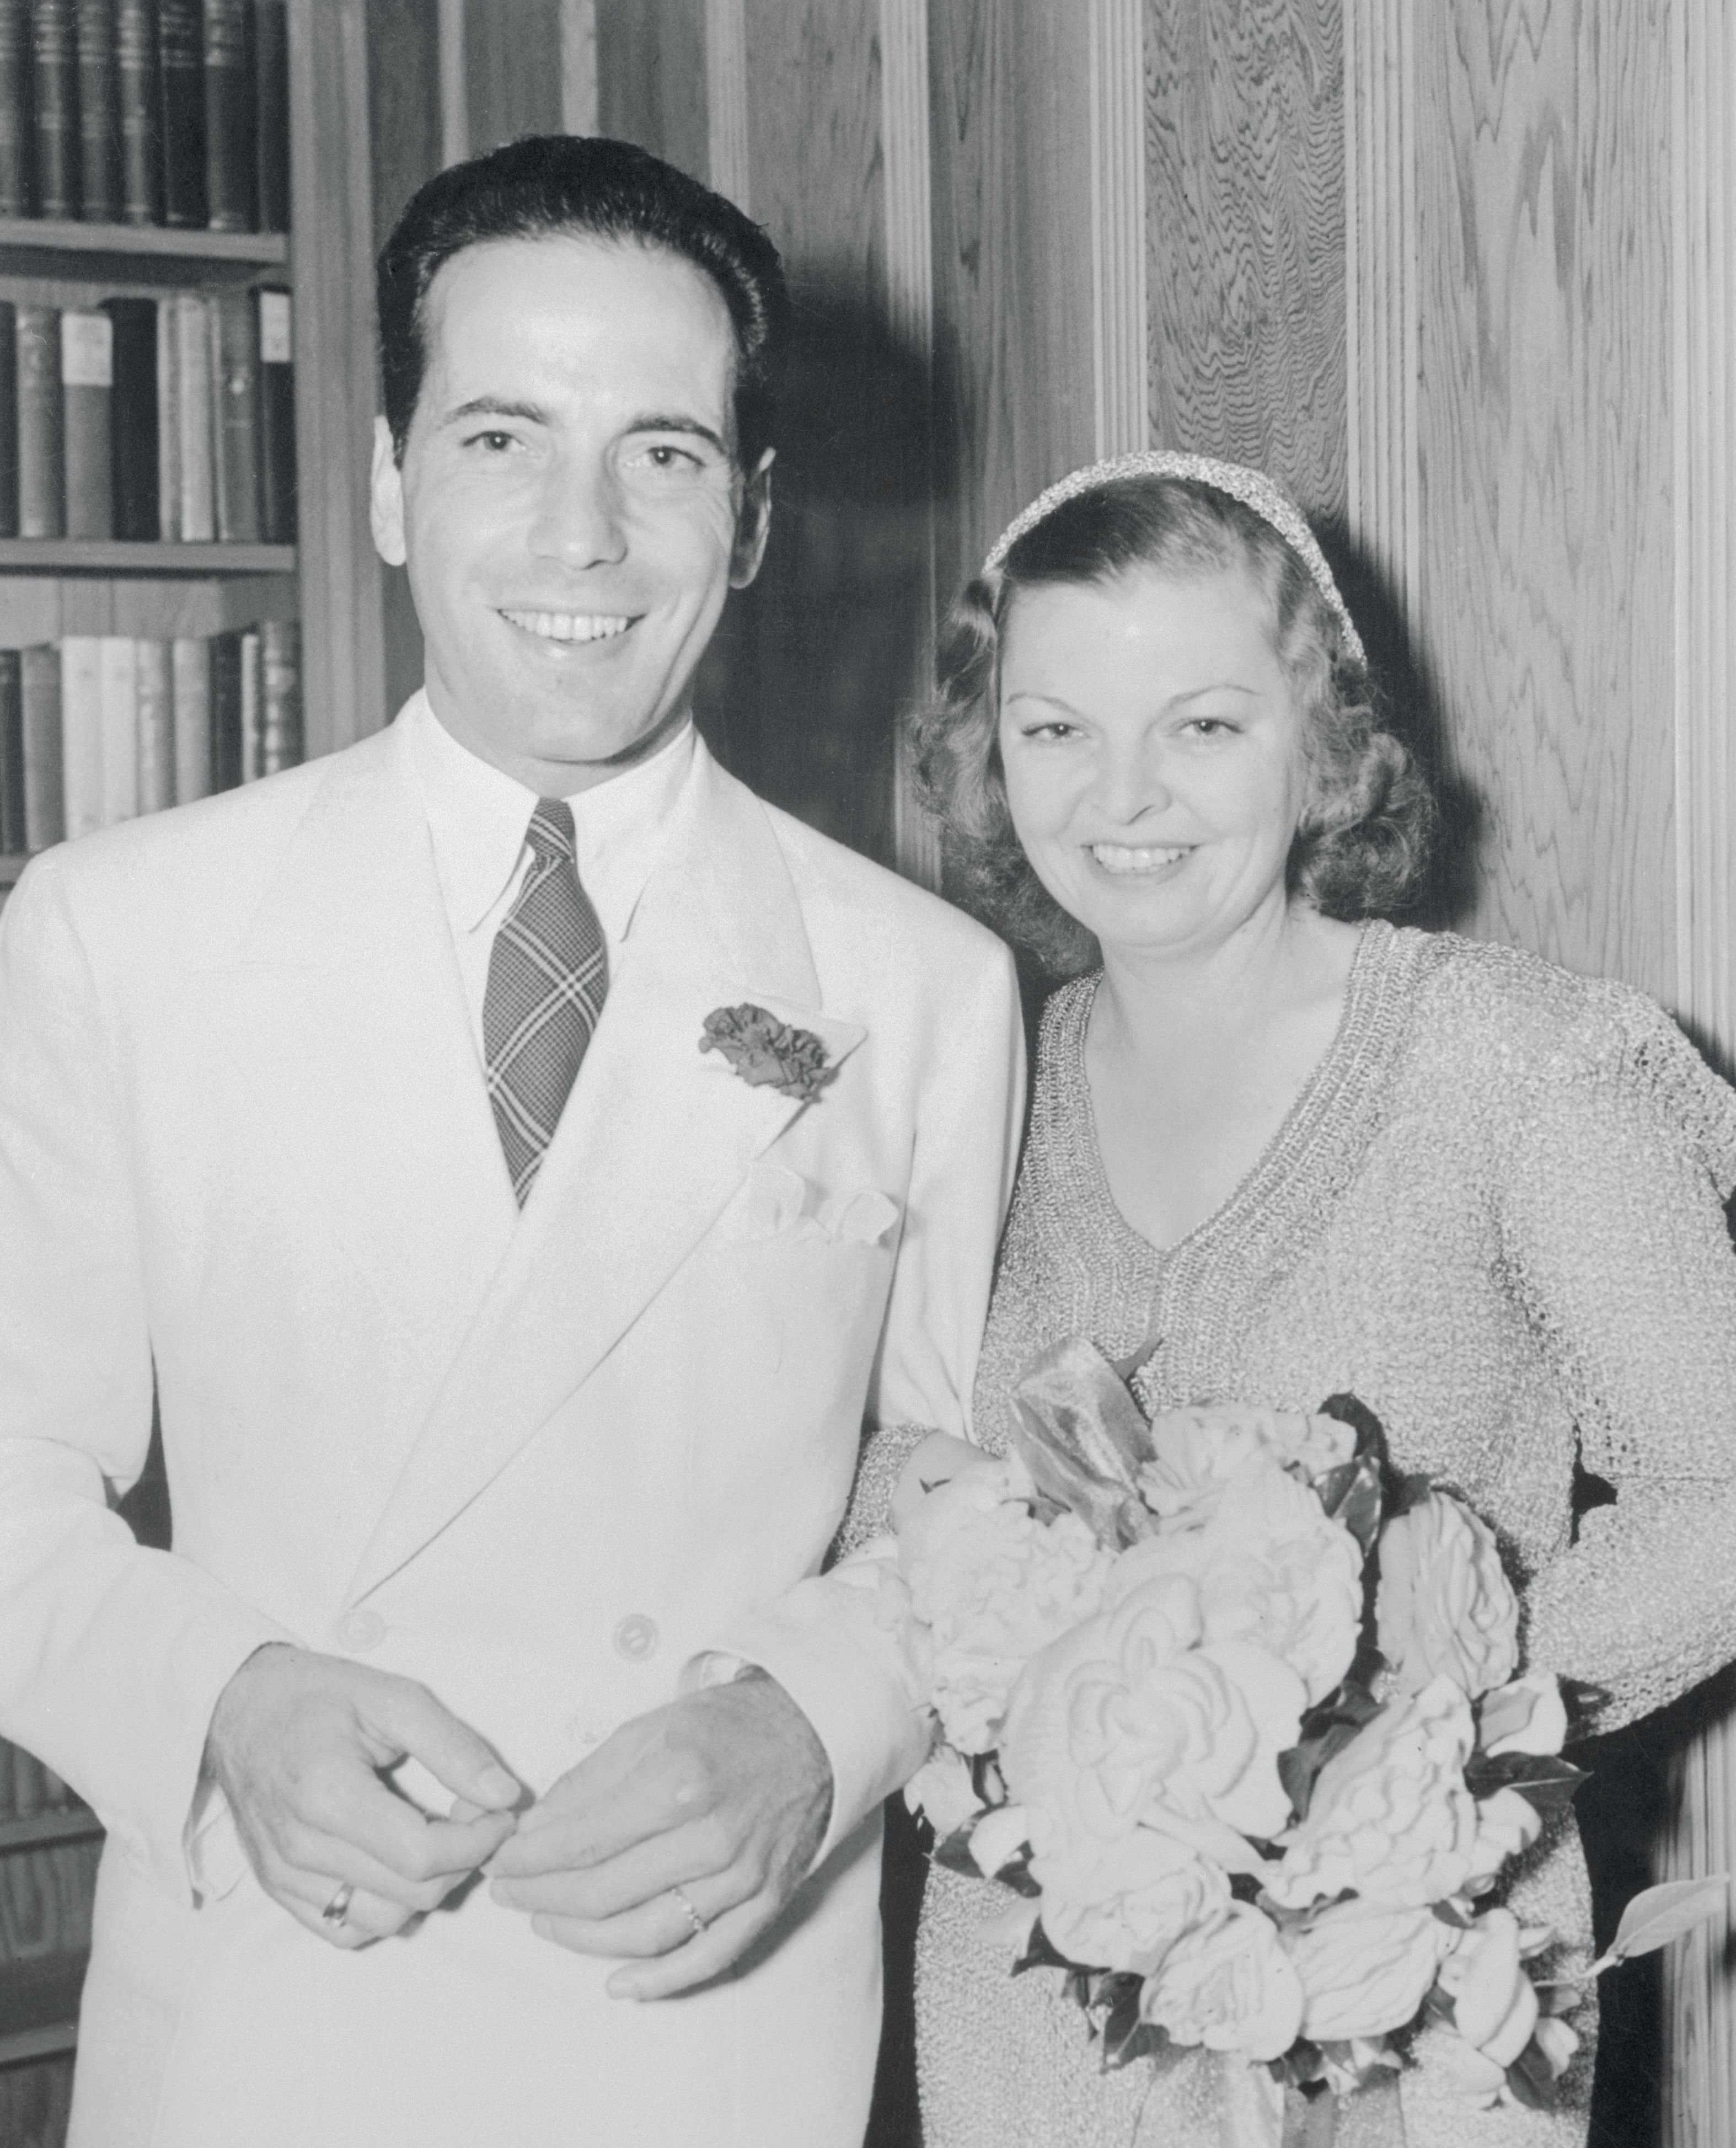 Humphrey Bogart and Mayo Methot, pictured shortly after their marriage. | Source: Bettmann/Getty Images